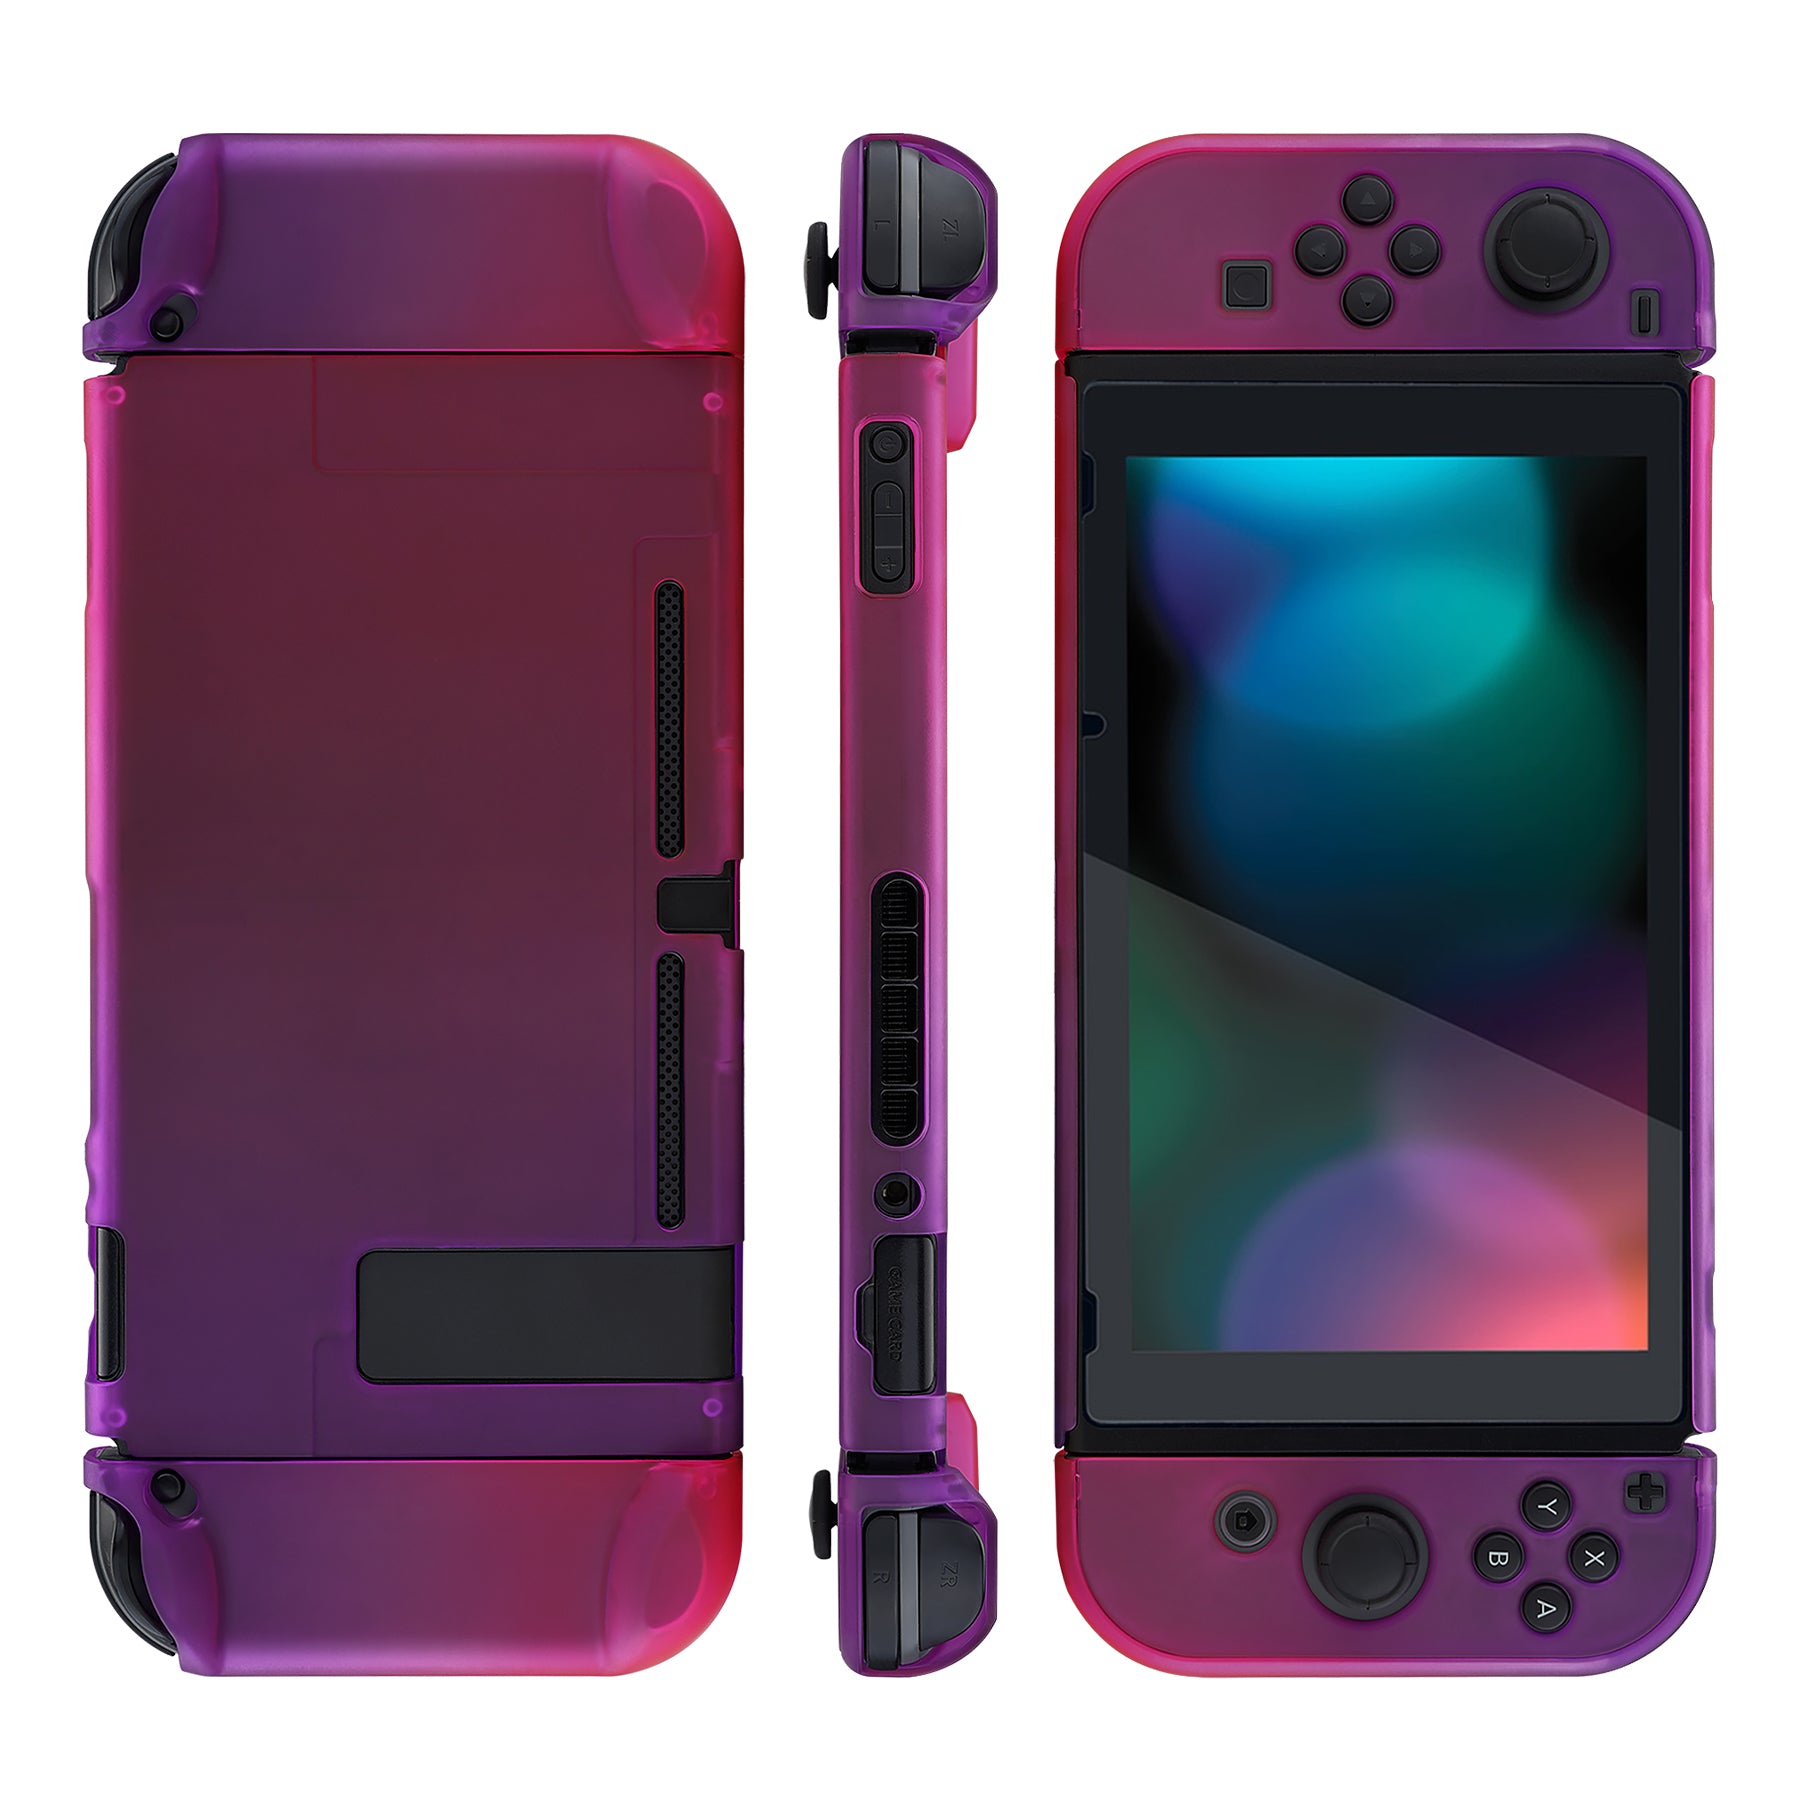 PlayVital Clear Atomic Purple Rose Red Back Cover for Nintendo